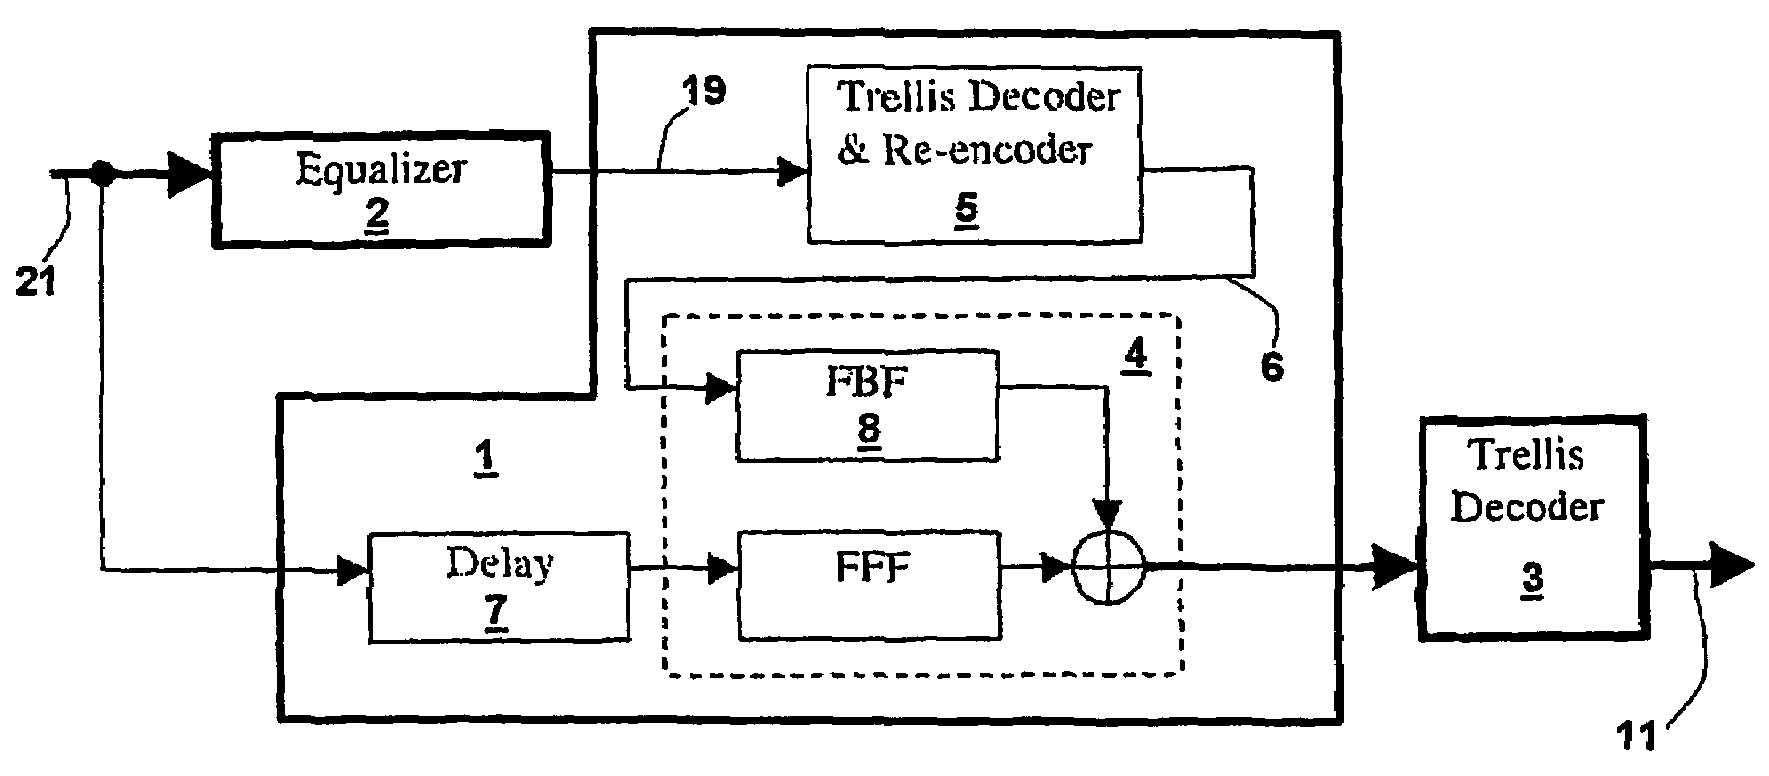 Concatenated equalizer/trellis decoder architecture for an HDTV receiver